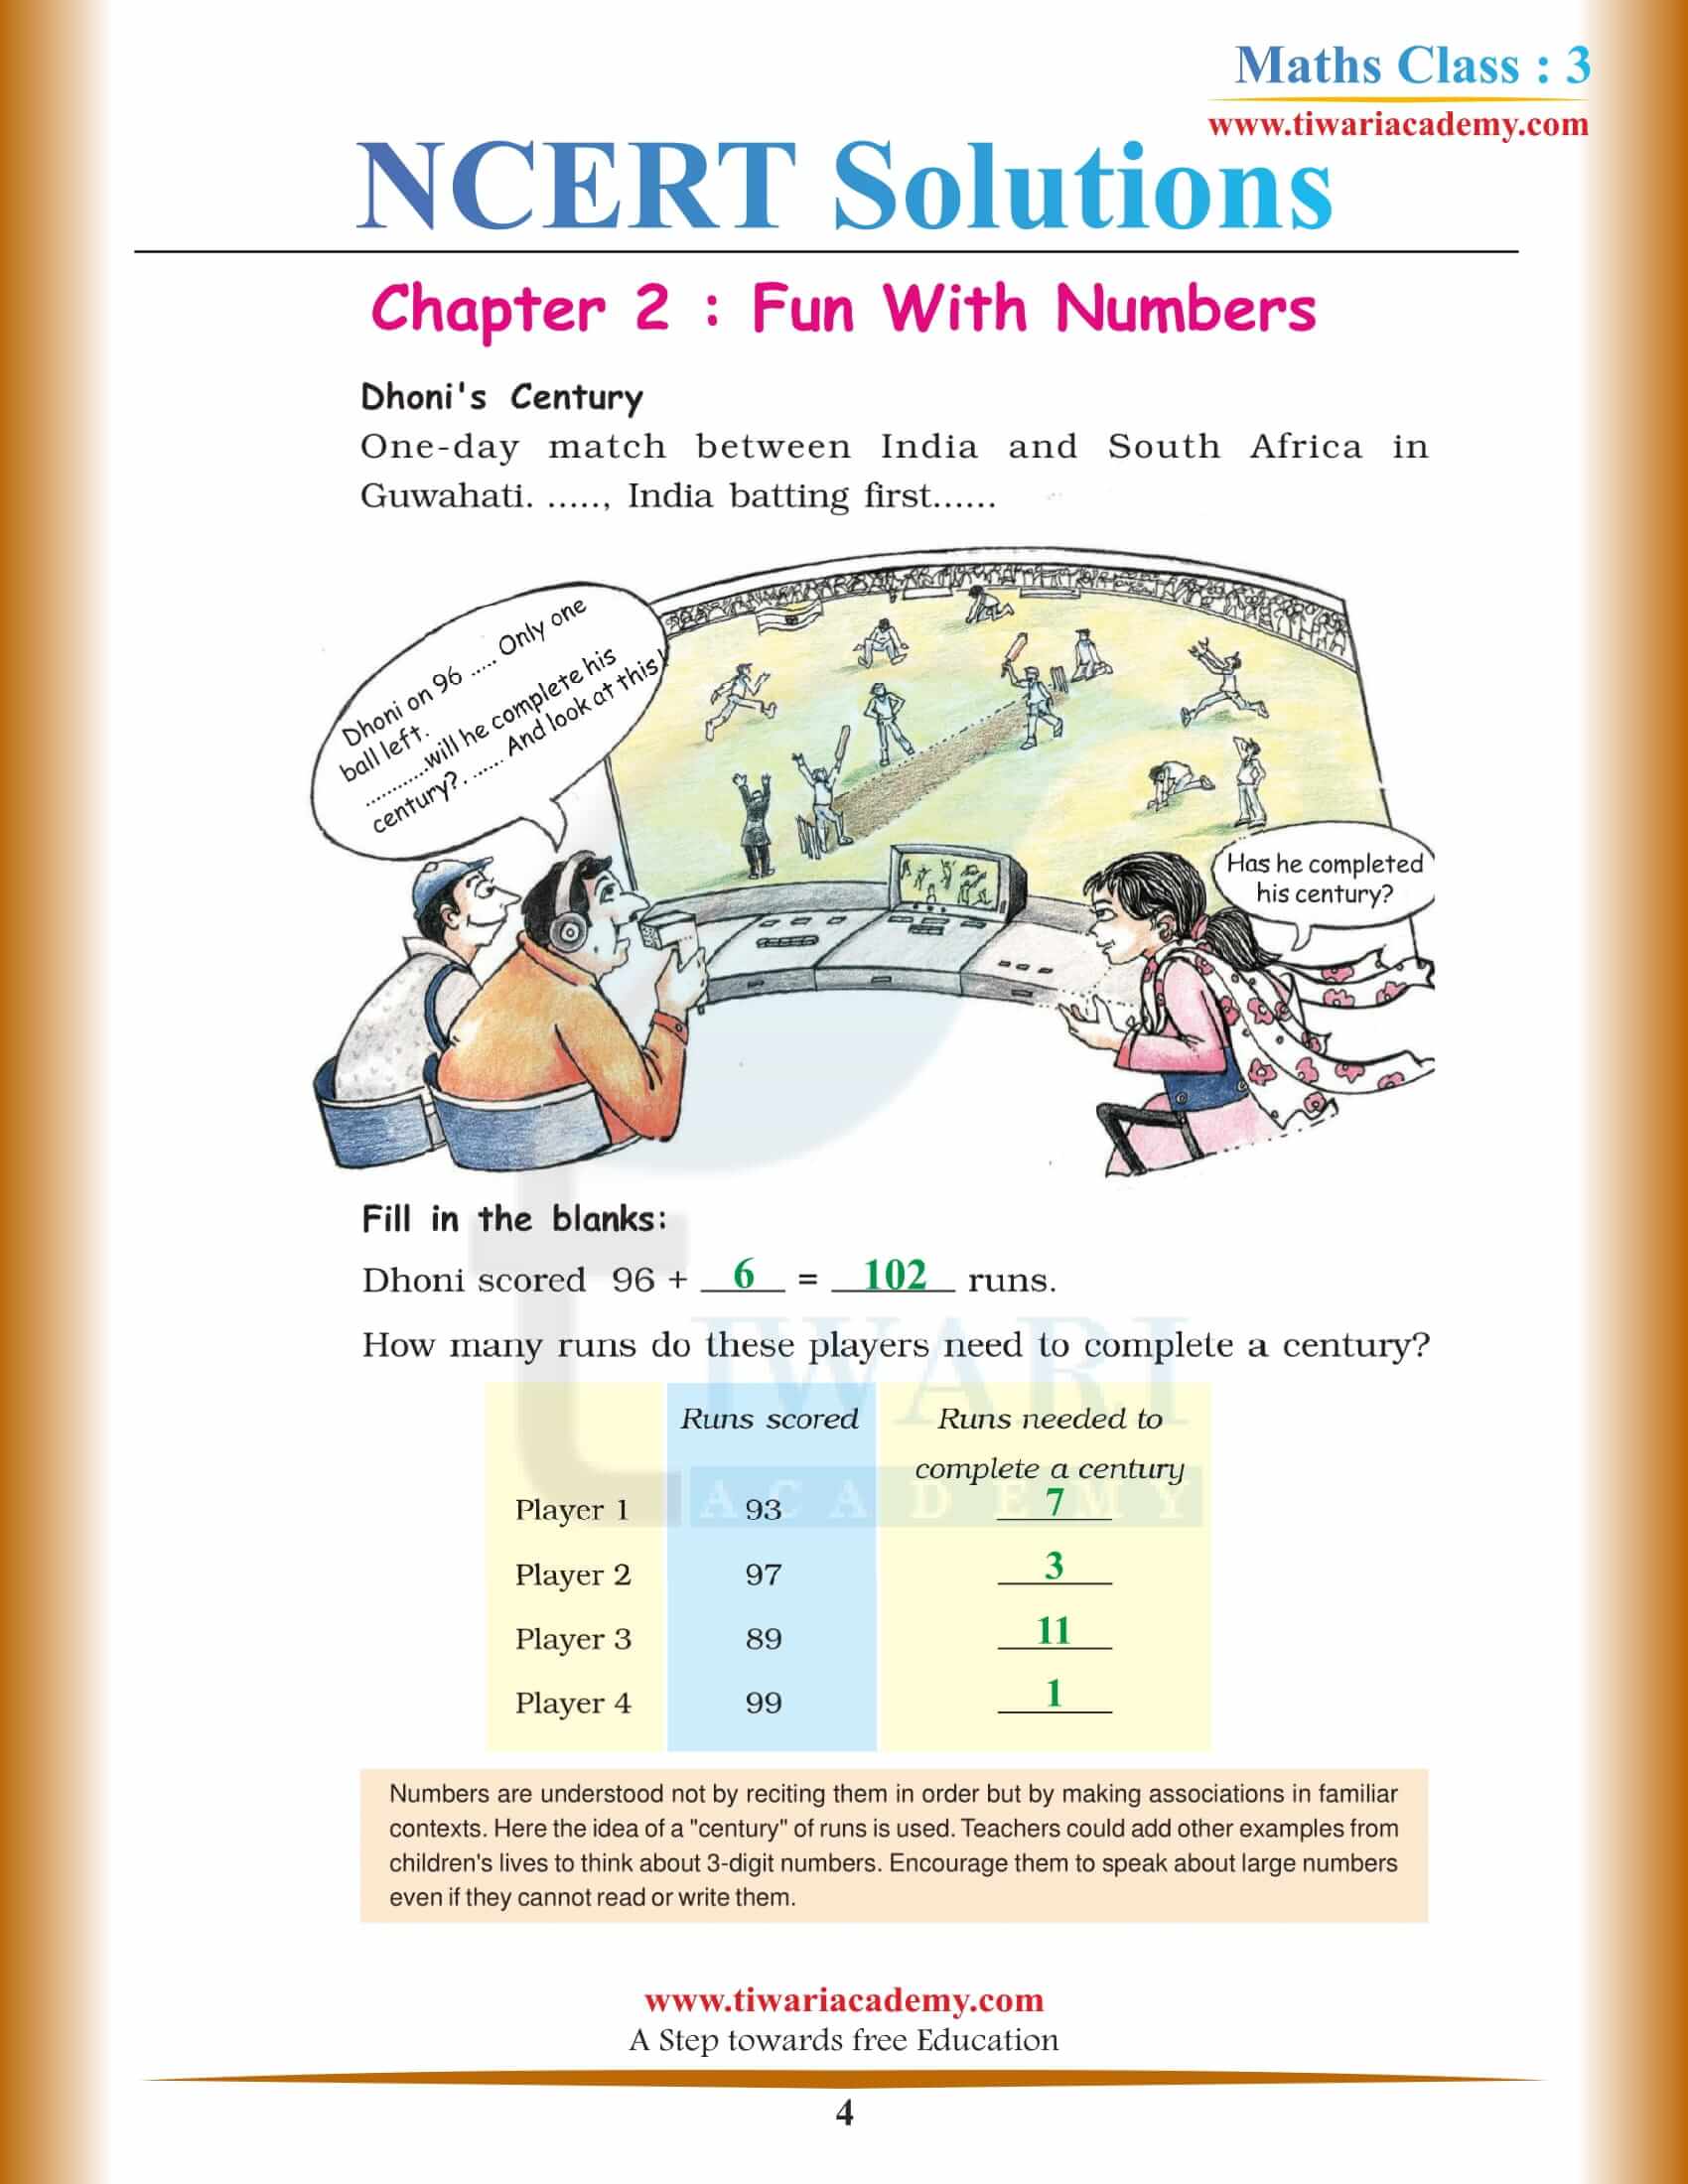 NCERT Solutions for Class 3 Maths Chapter 2 free download